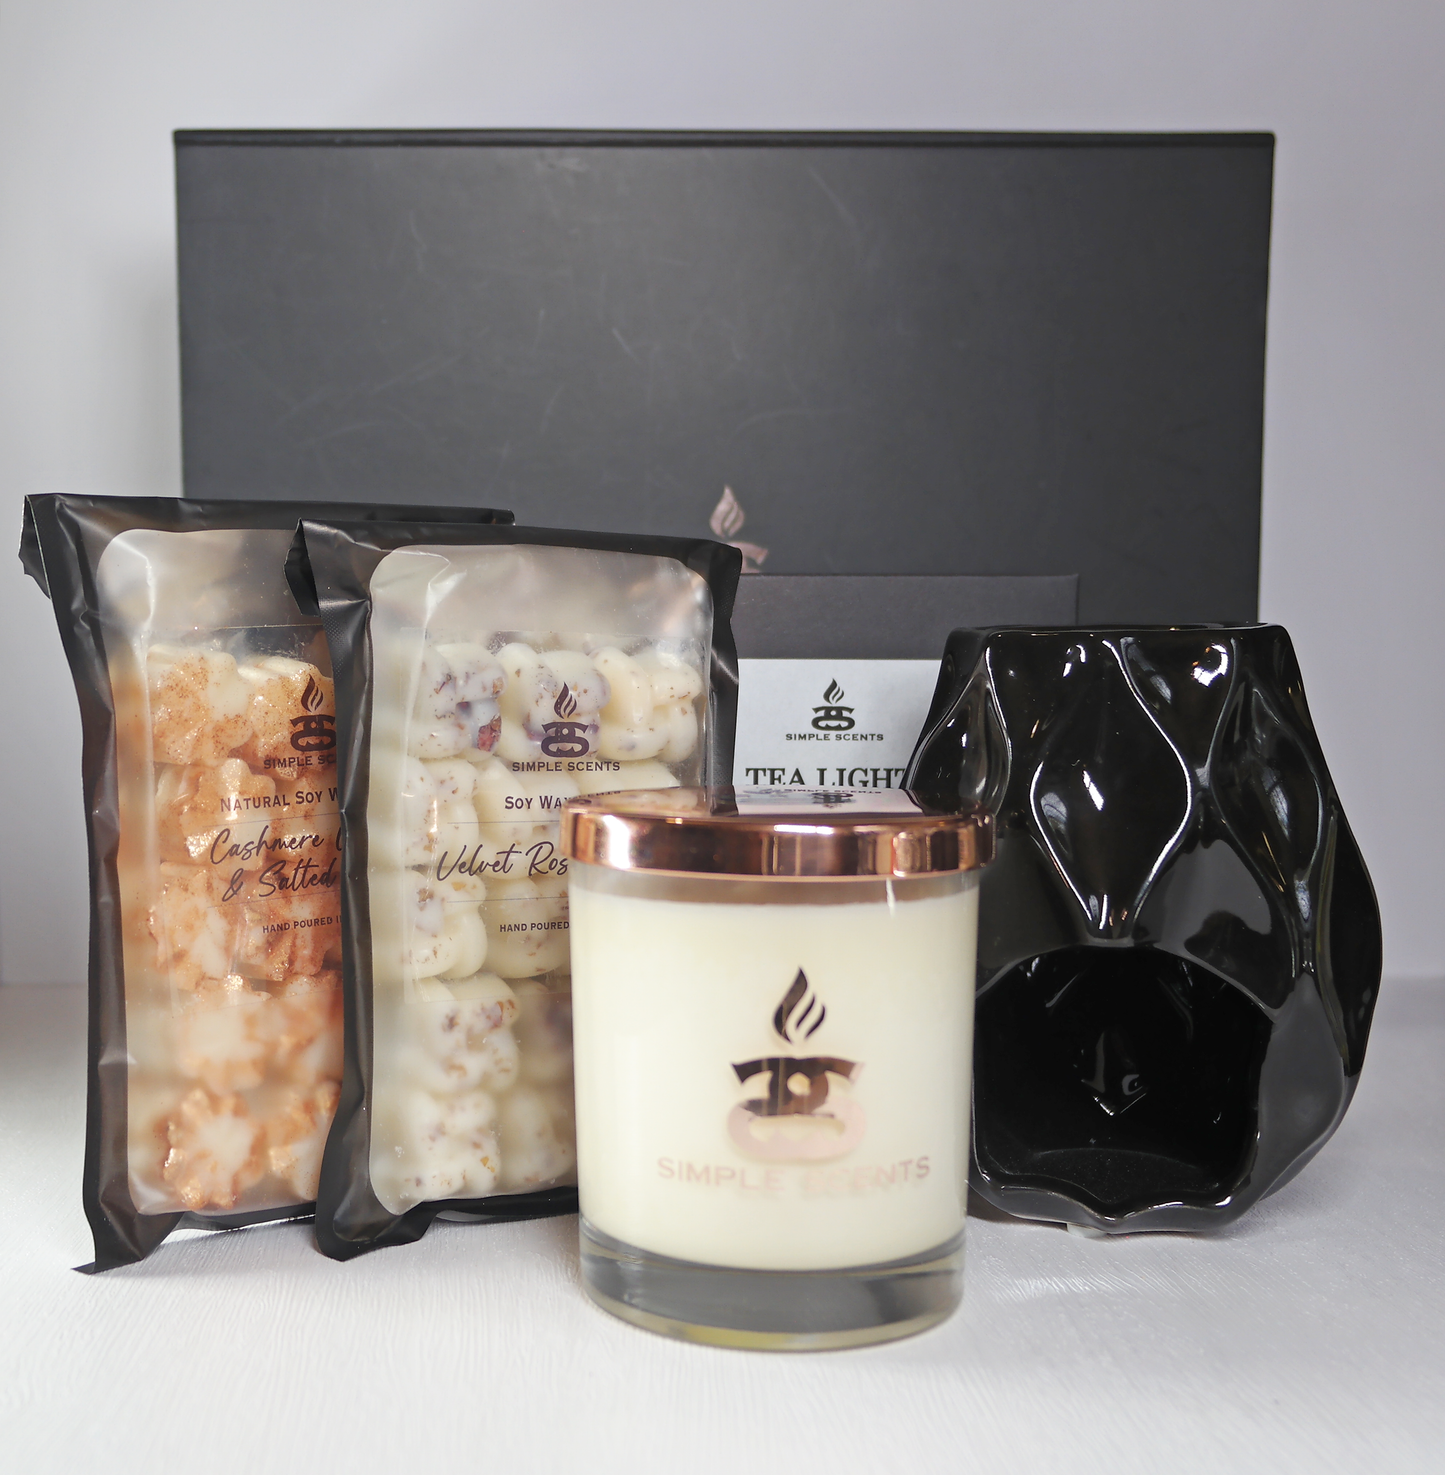 Best Candle Gift Box, Simple Scents Gift Set